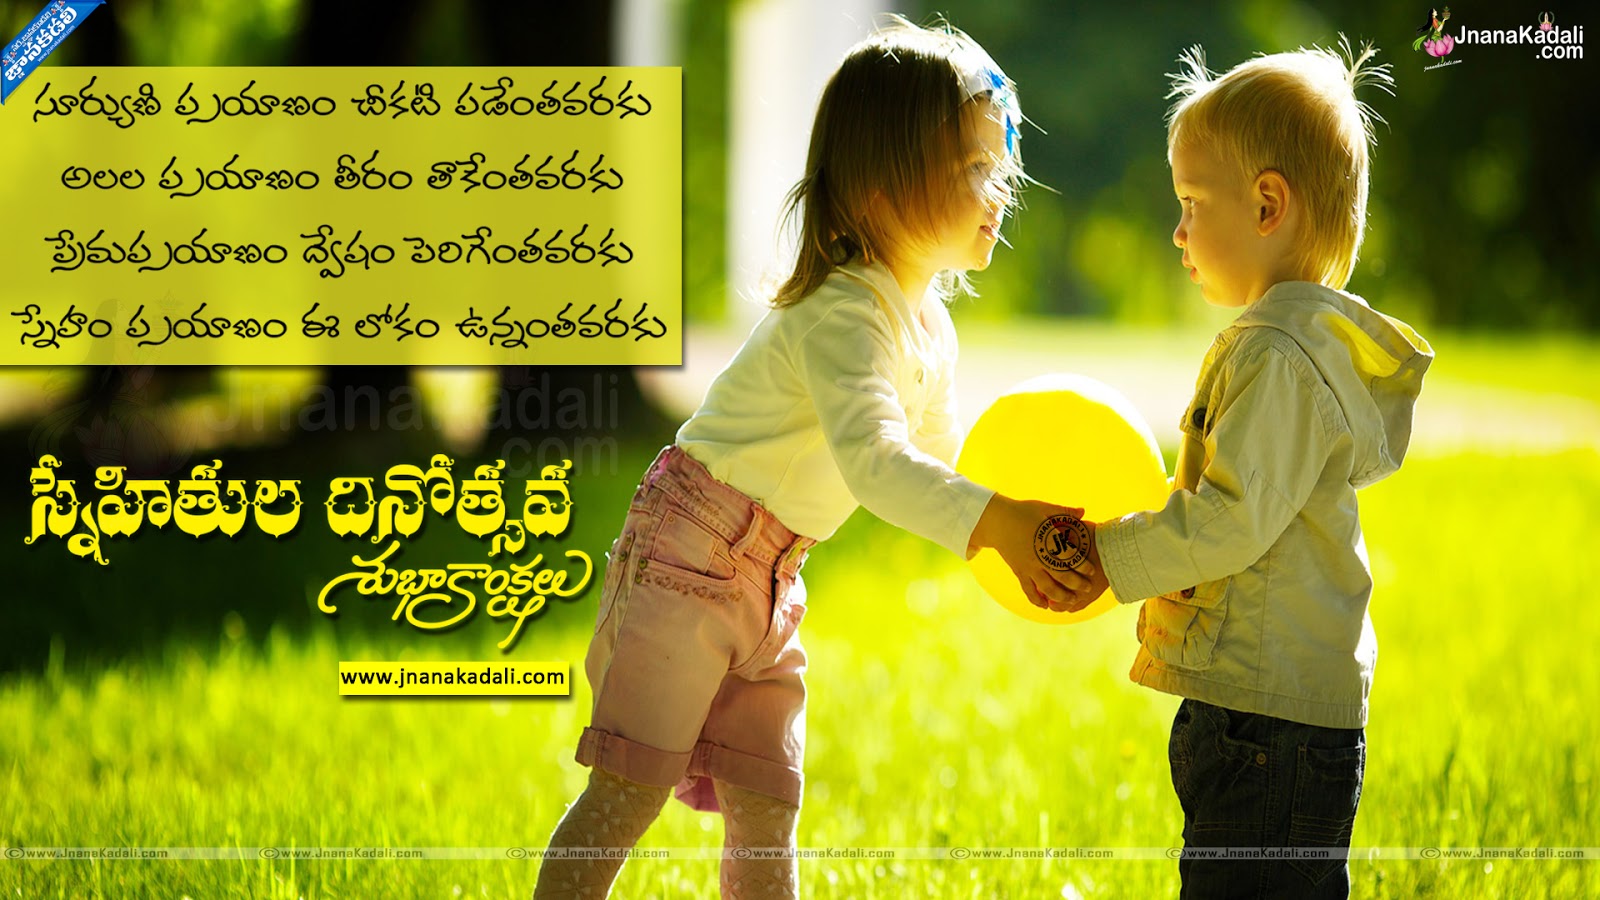 Friendship day telugu quotations with hd wallpapers International ...